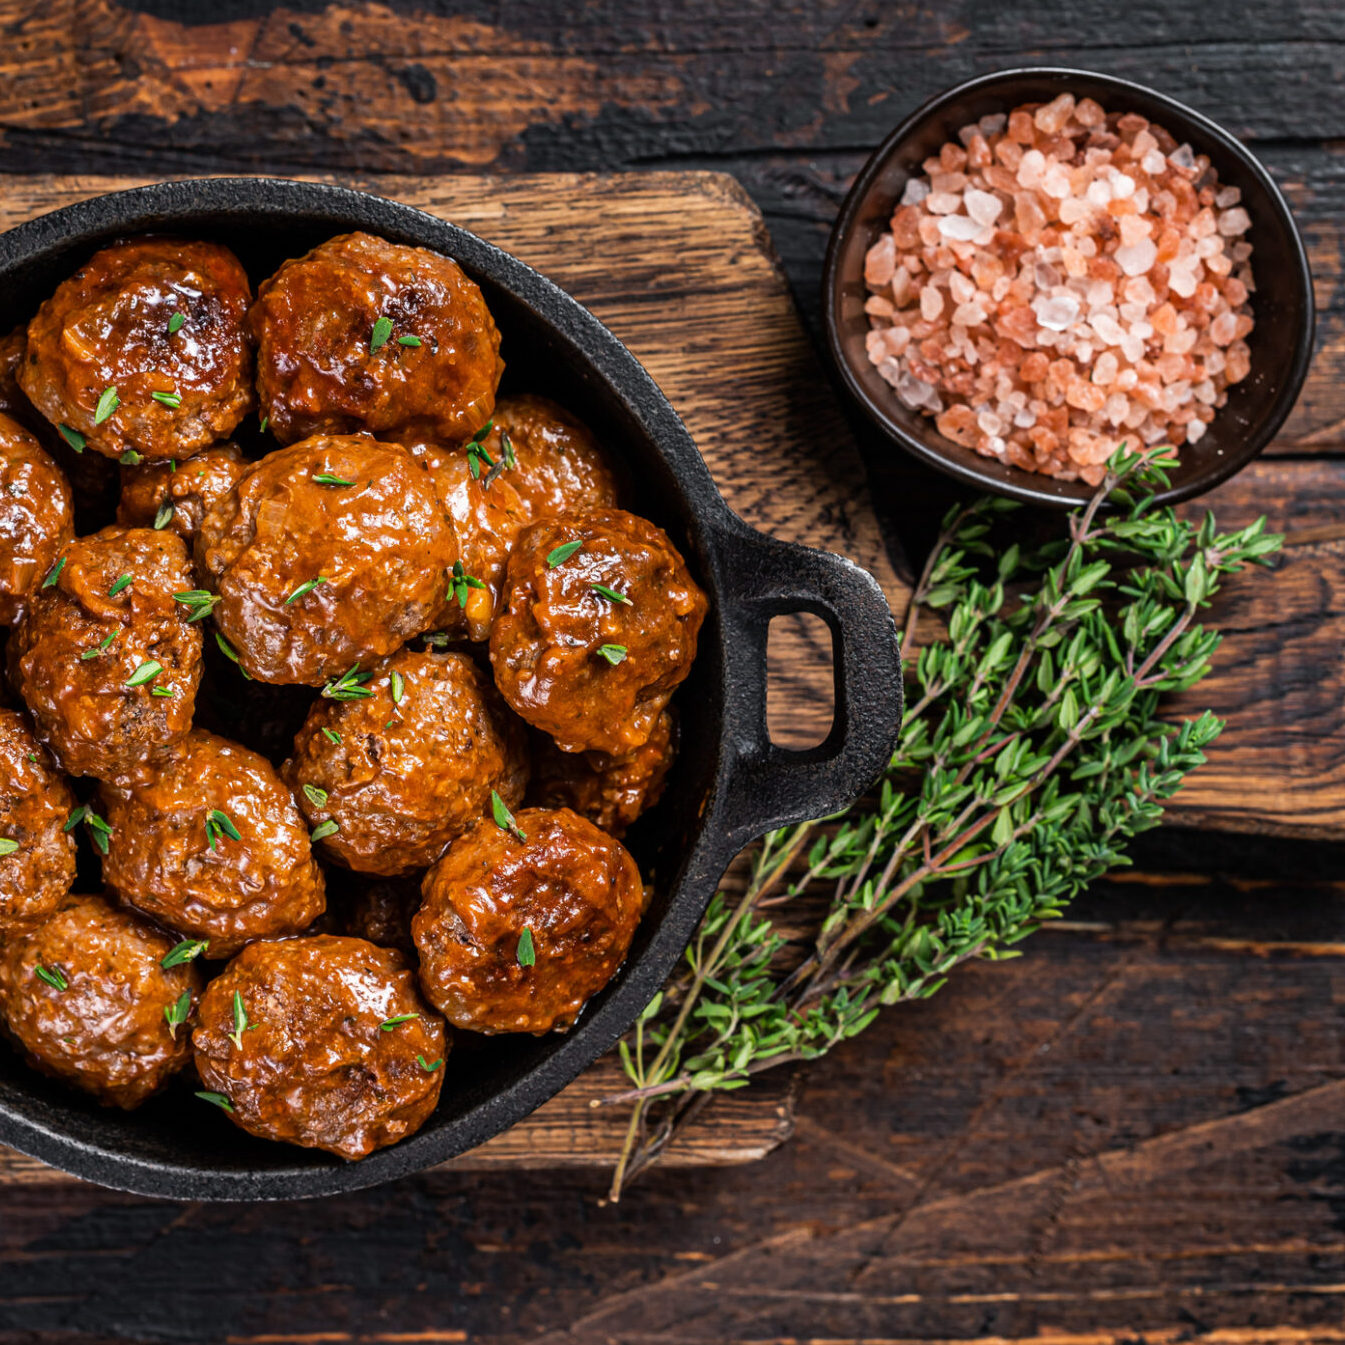 Meatballs in tomato sauce from beef and pork meat with thyme in rustic pan. Dark background. Top view.